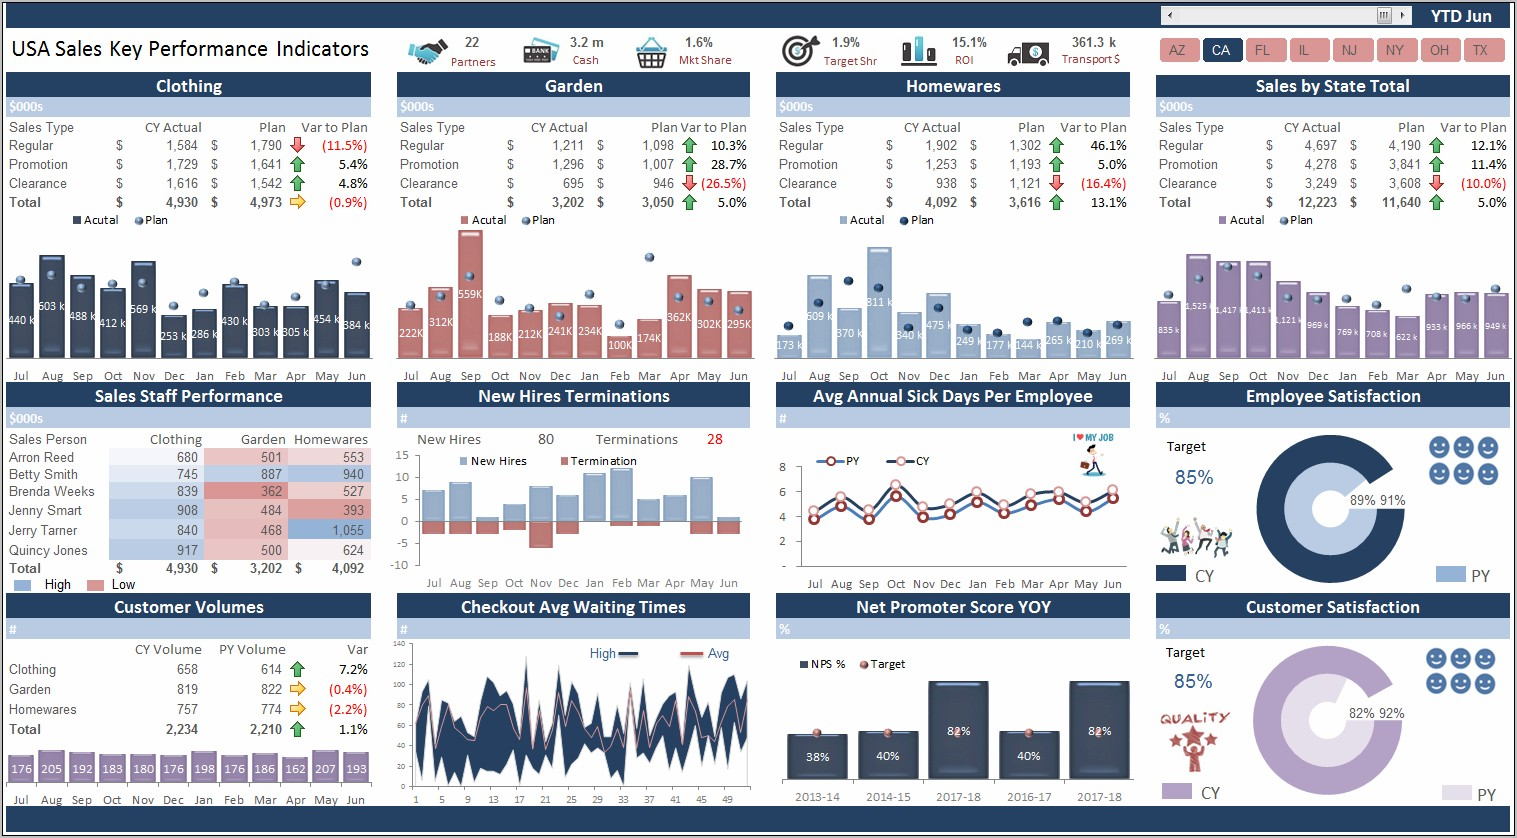 Sales Report Dashboard Templates